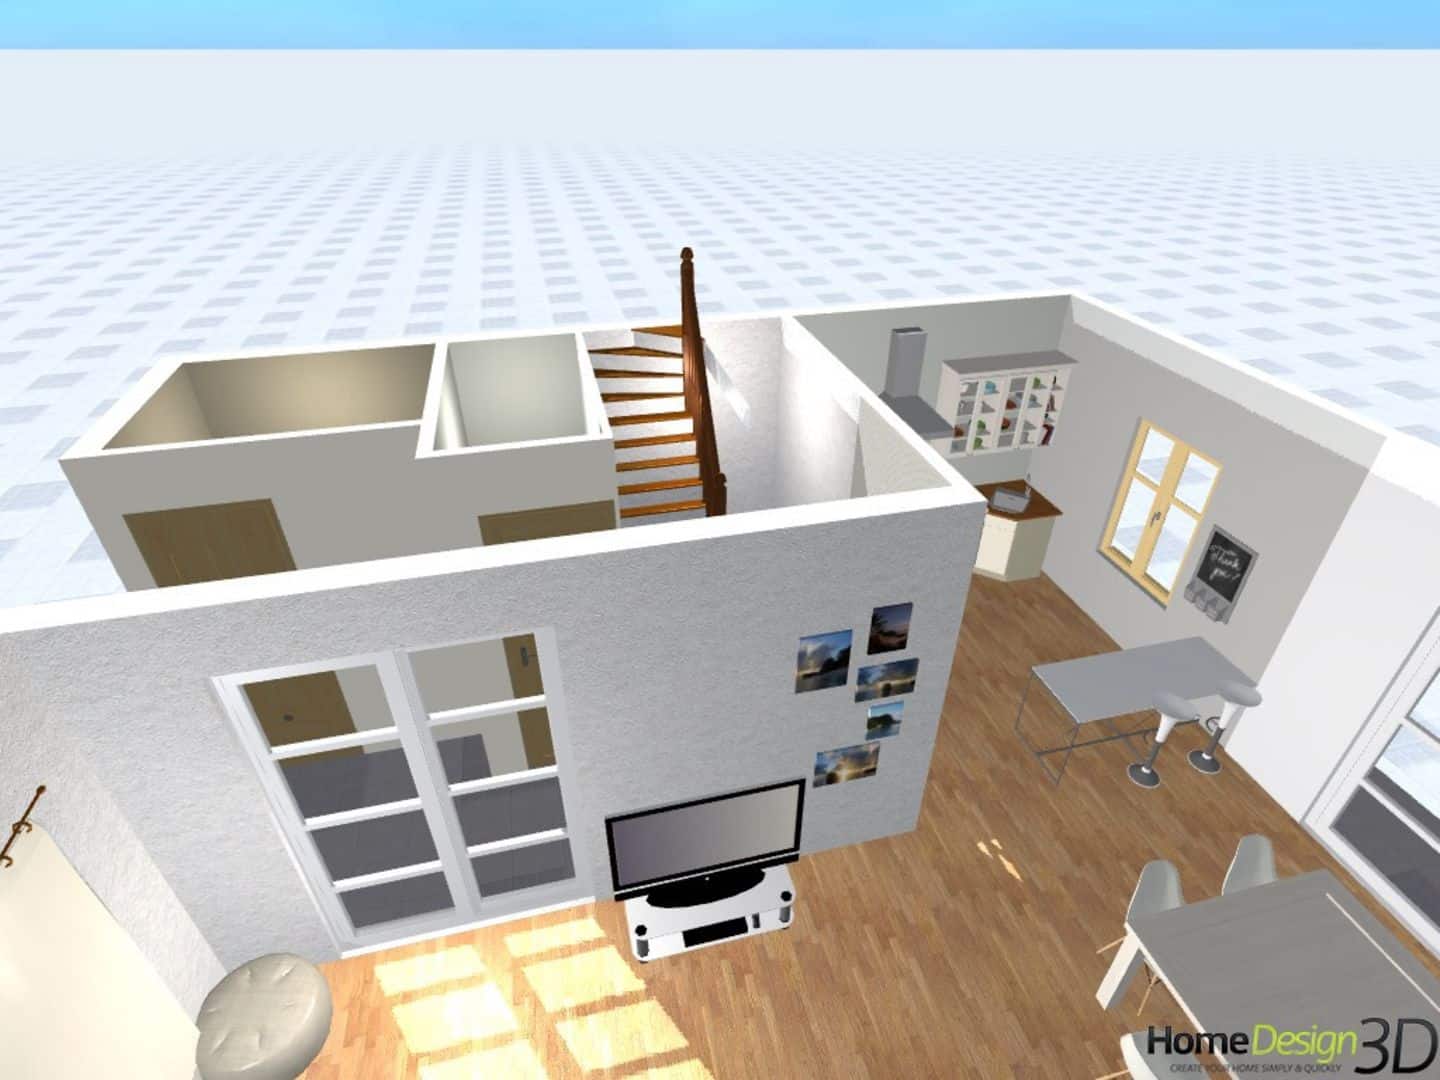 Residential Construction Design Software | 3D House Building Software |  SketchUp